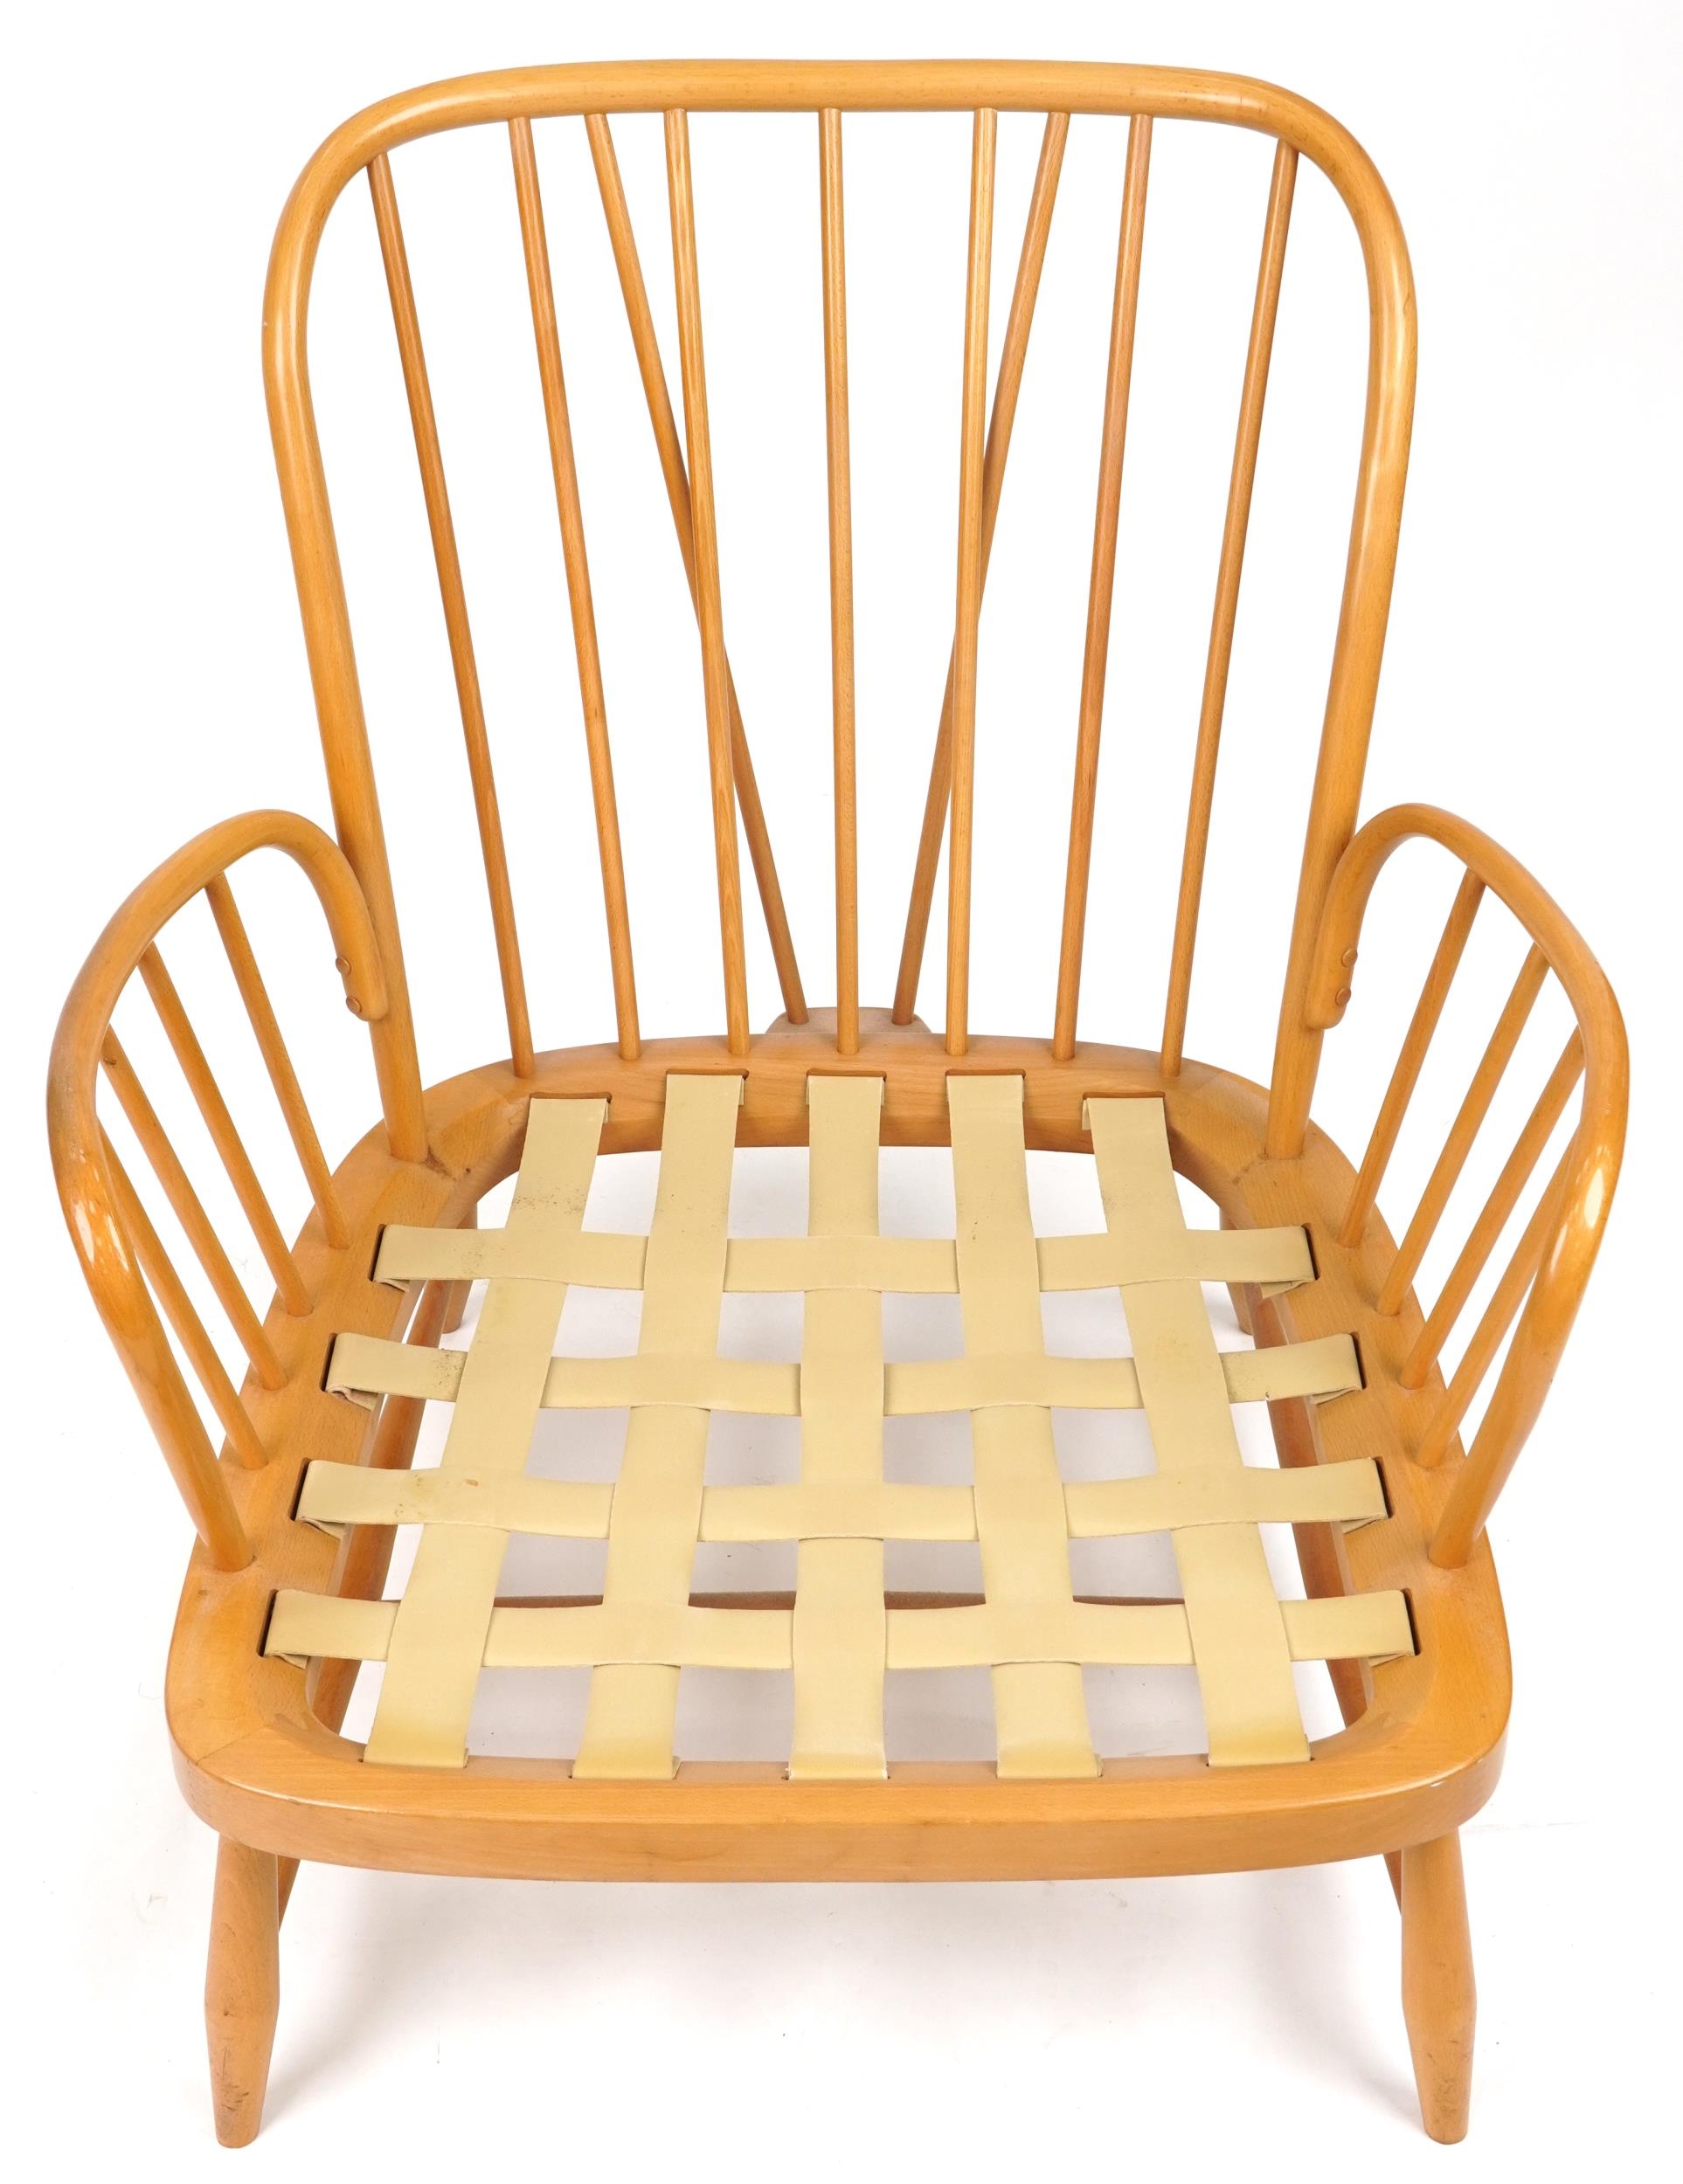 Ercol light elm Jubilee stick back armchair with red fleur de lis upholstered cushioned seats, - Image 3 of 6